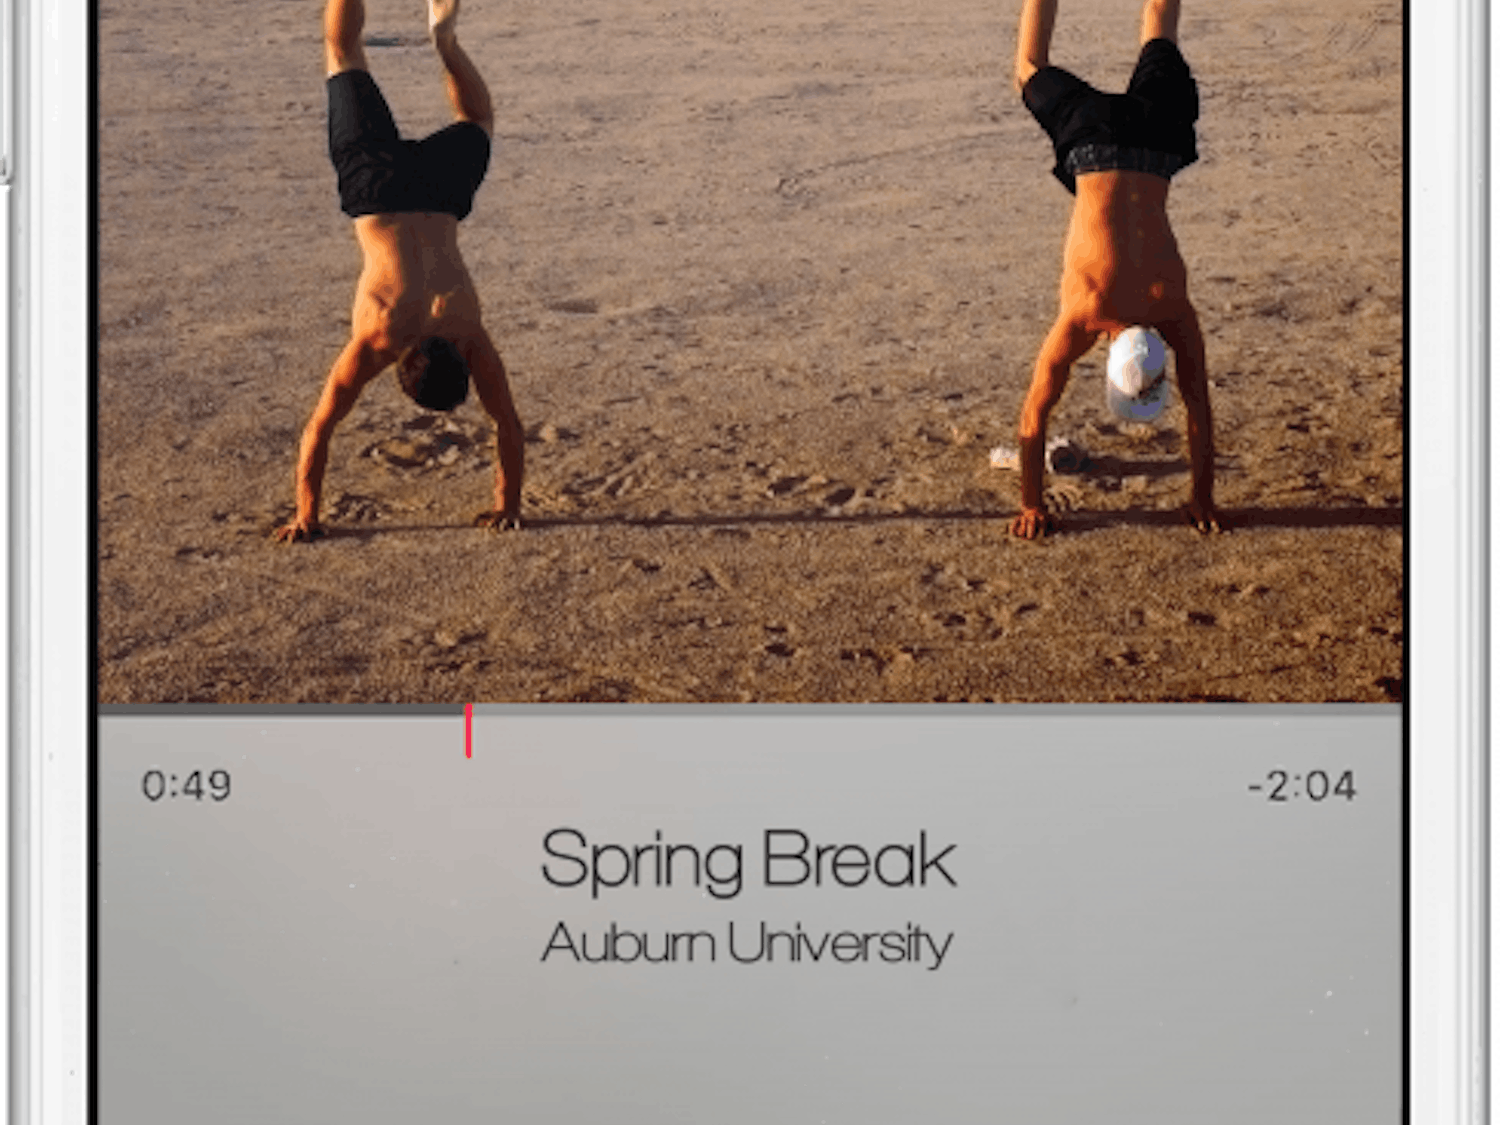 Music is the best way to ensure you have a fun-filled spring break.